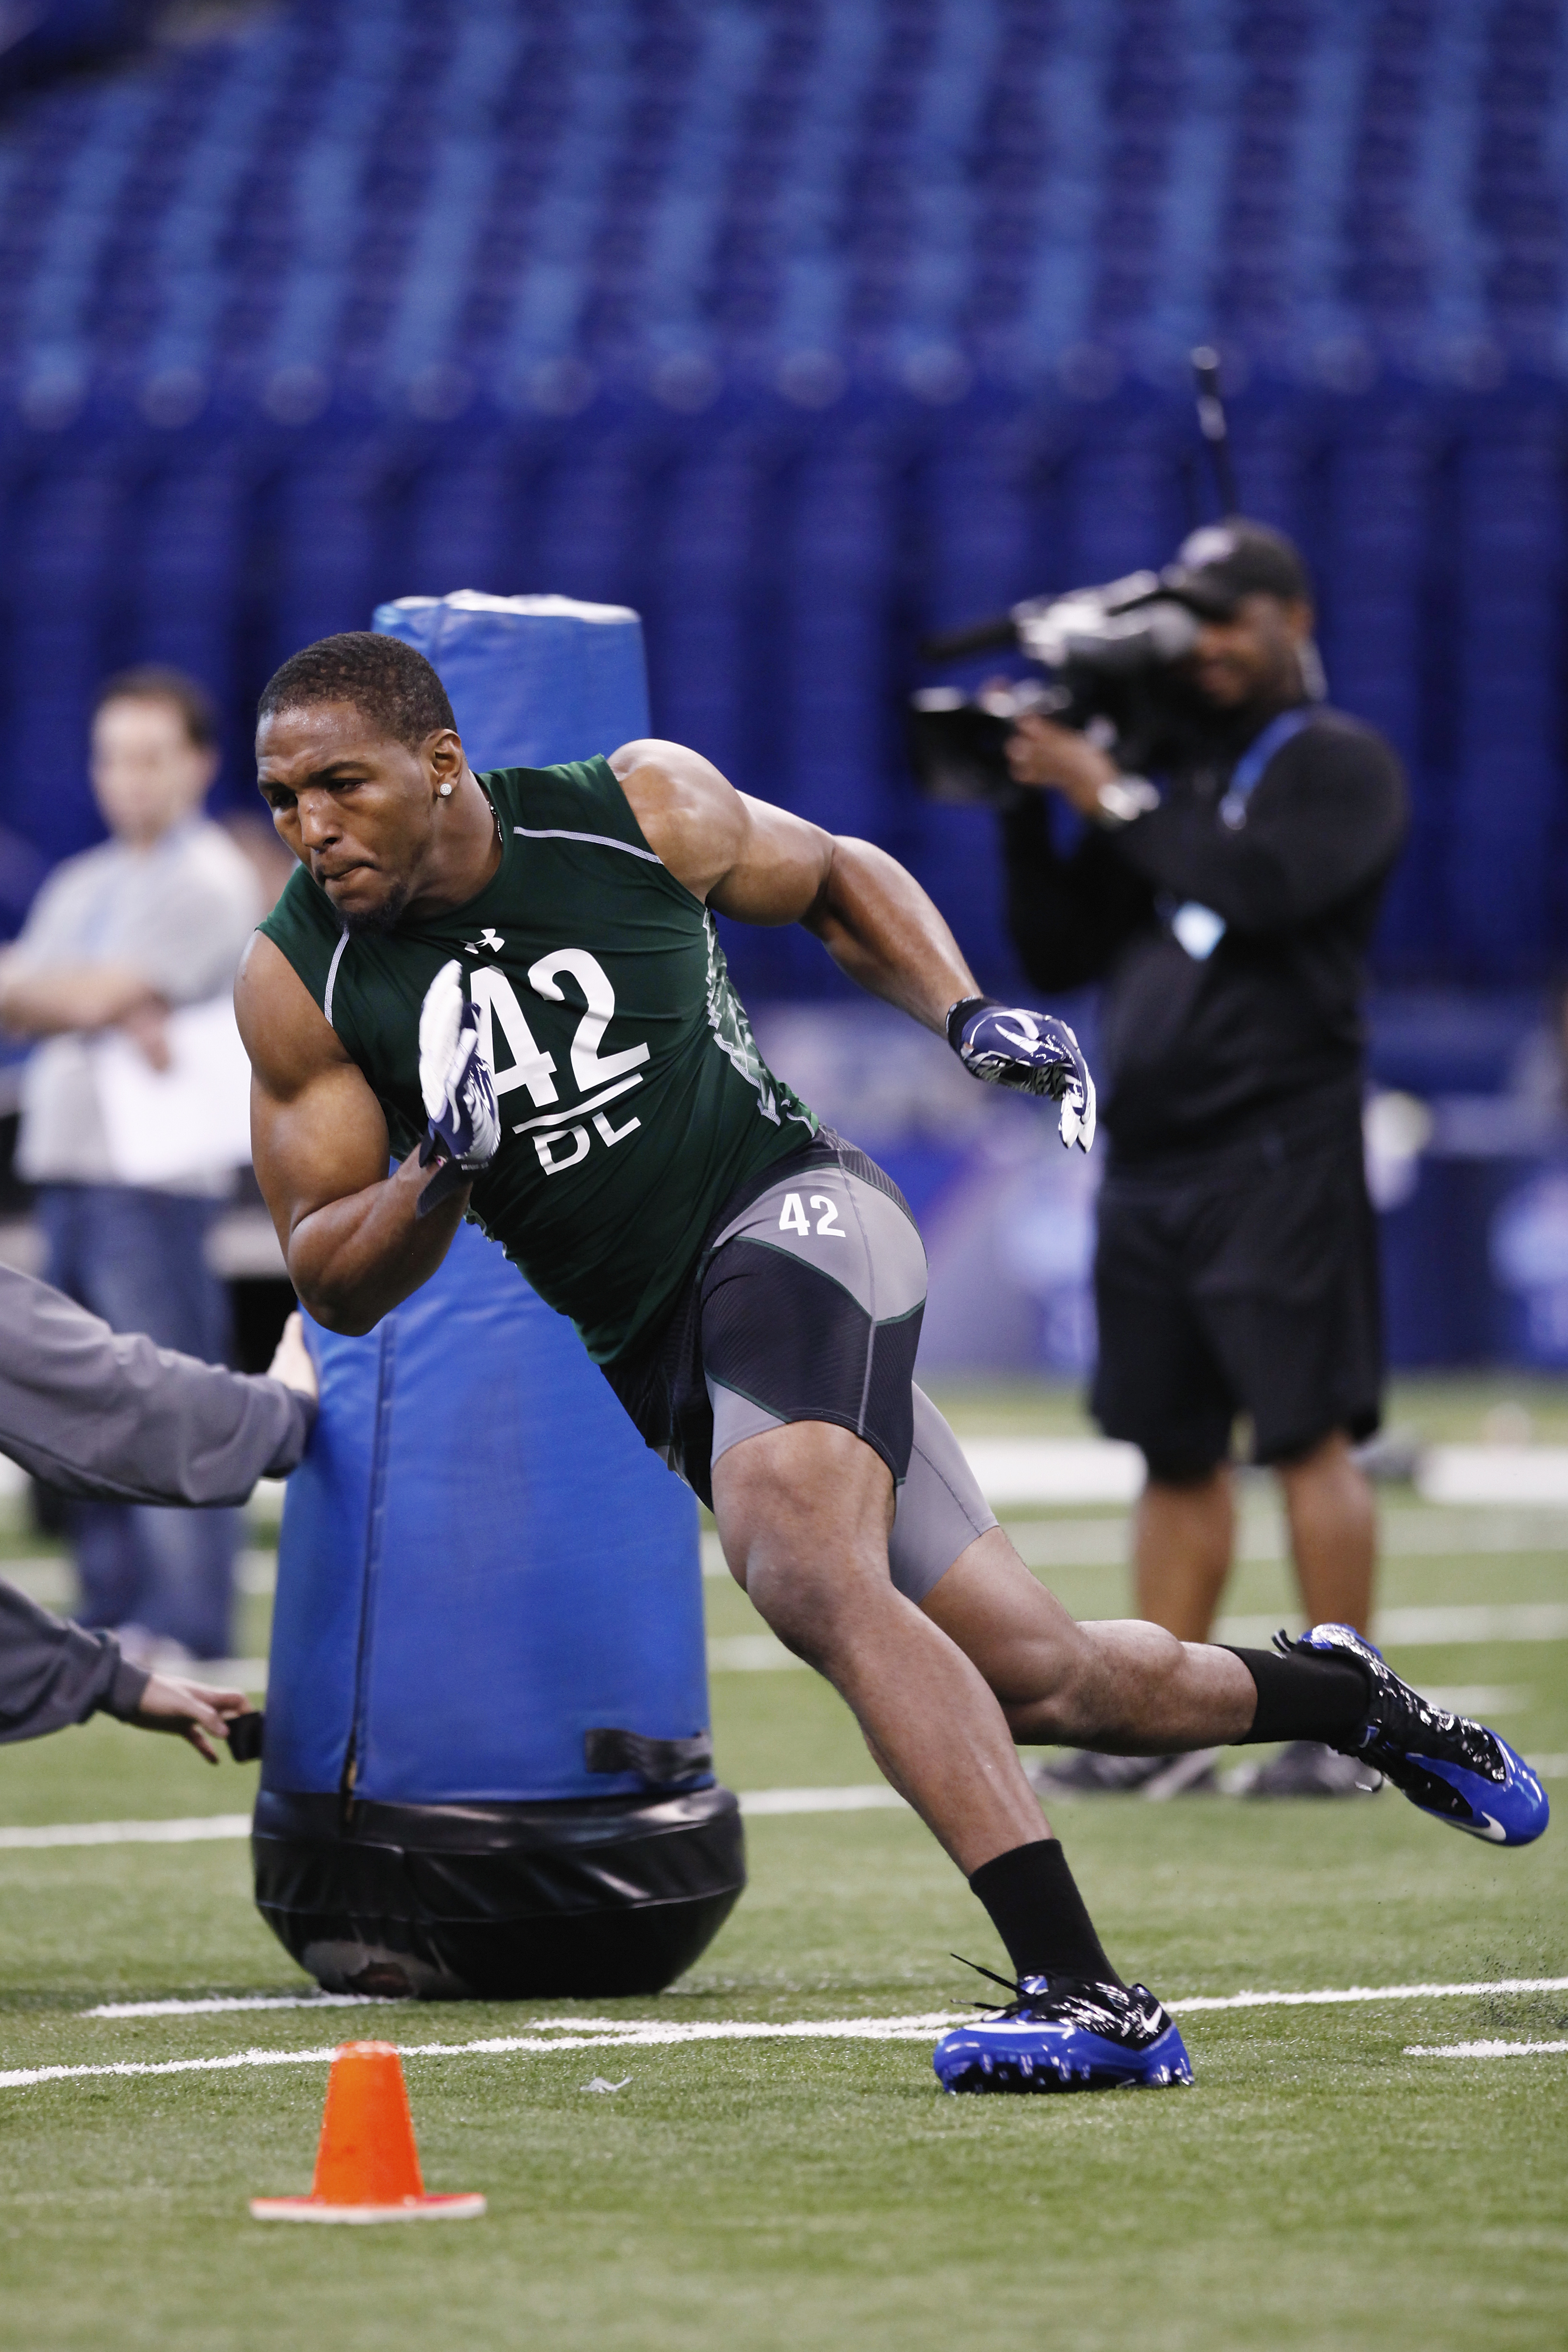 INDIANAPOLIS, IN - FEBRUARY 28:  Defensive lineman Robert Quinn of North Carolina runs through a drill during the 2011 NFL Scouting Combine at Lucas Oil Stadium on February 28, 2011 in Indianapolis, Indiana. (Photo by Joe Robbins/Getty Images)